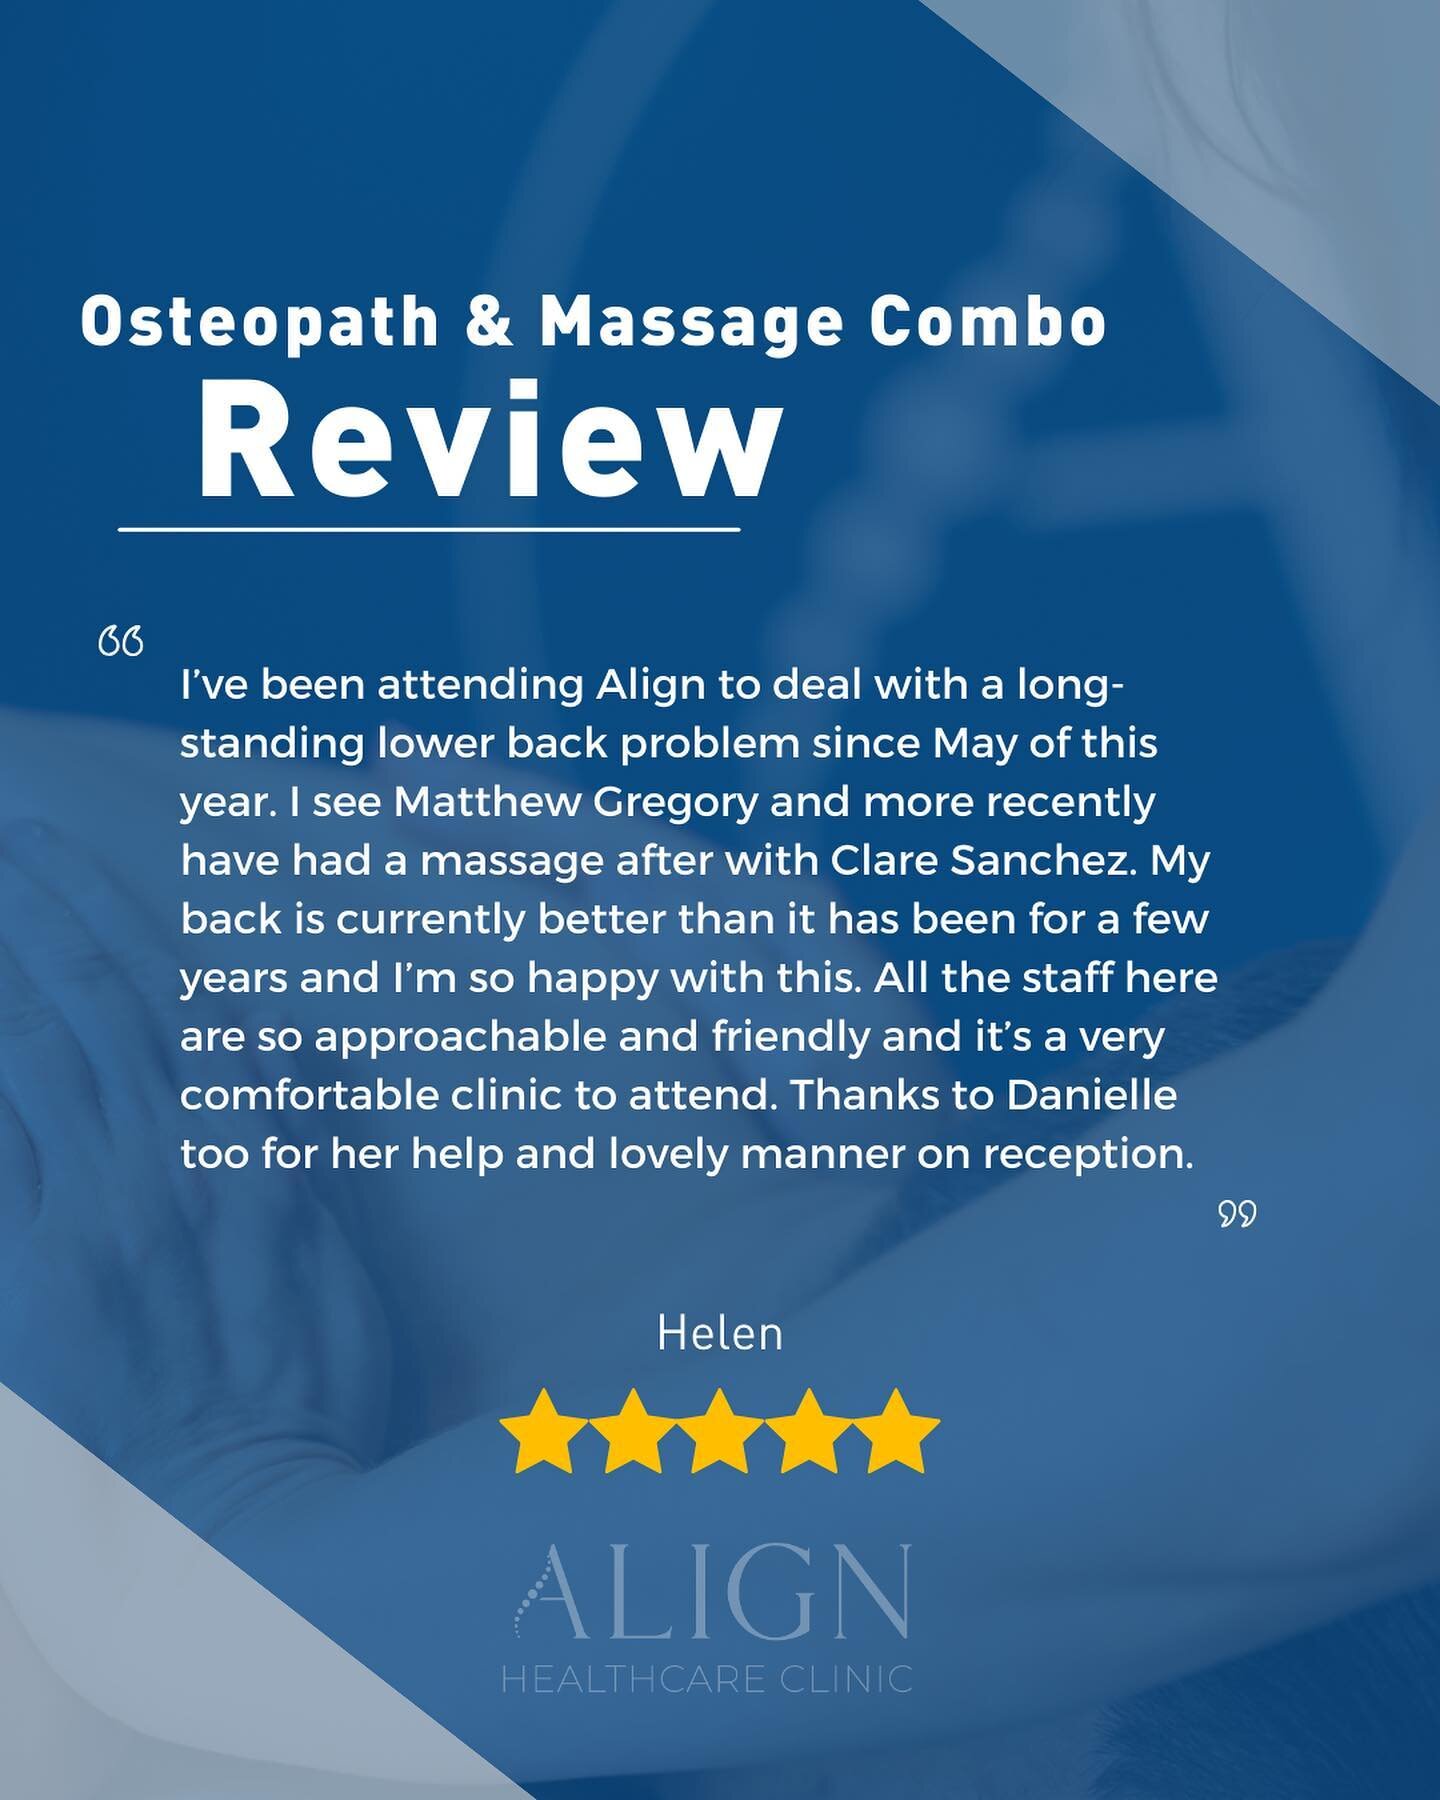 Lovely review for our Osteopath &amp; Massage Combo treatments!

Available every Wednesday morning and Friday afternoon. See the Osteopath for 30 minutes followed the Massage Therapist for 30 minutes.

#bootlehealthcare #liverpoolhealthcare #healthca